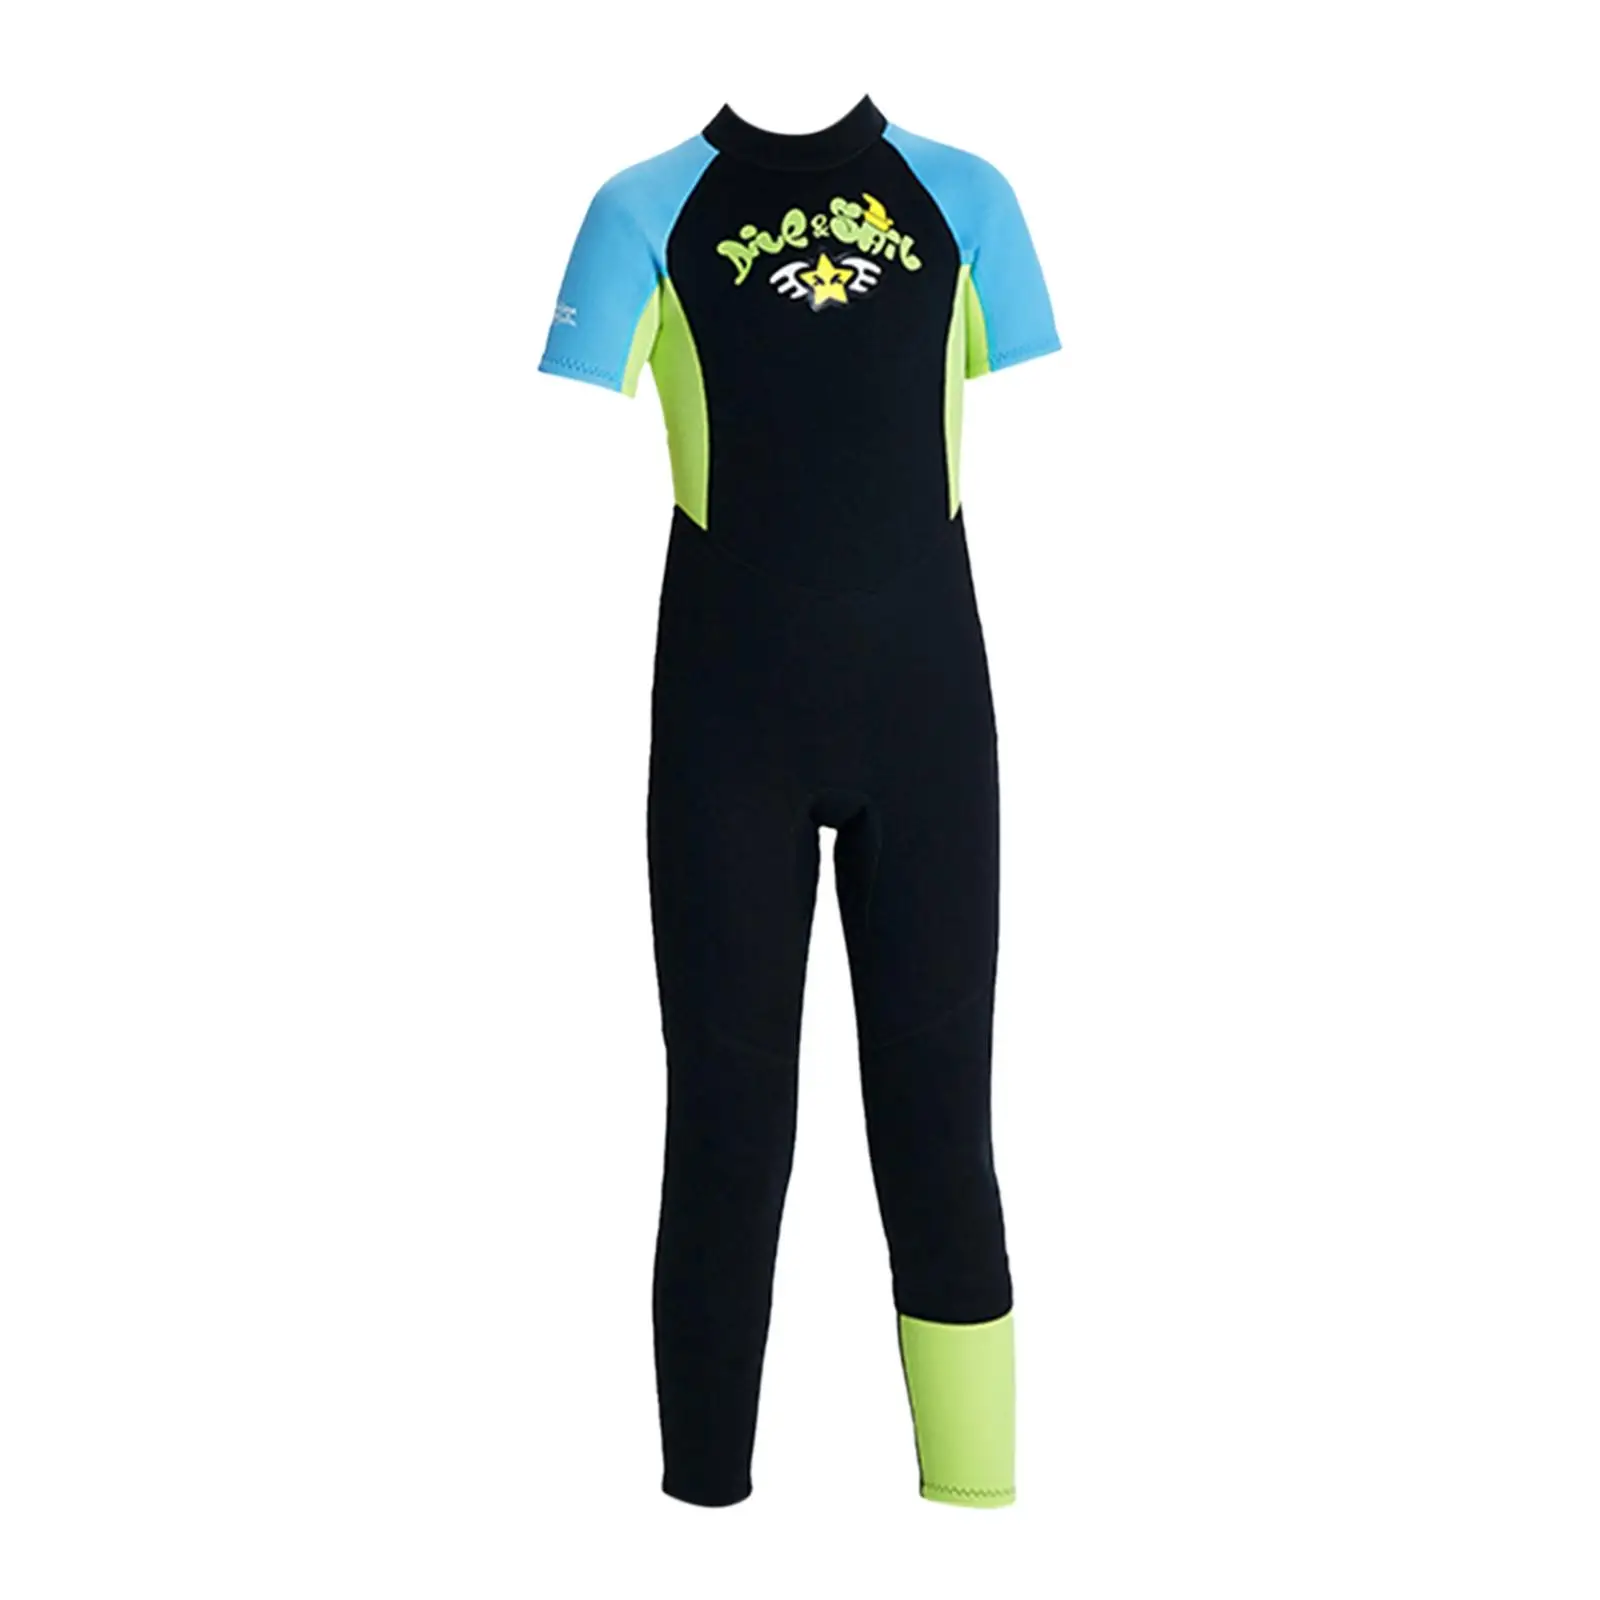 2.5mm Neoprene Full suits Diving Swimsuits Boating Short Sleeve Kids Wetsuit